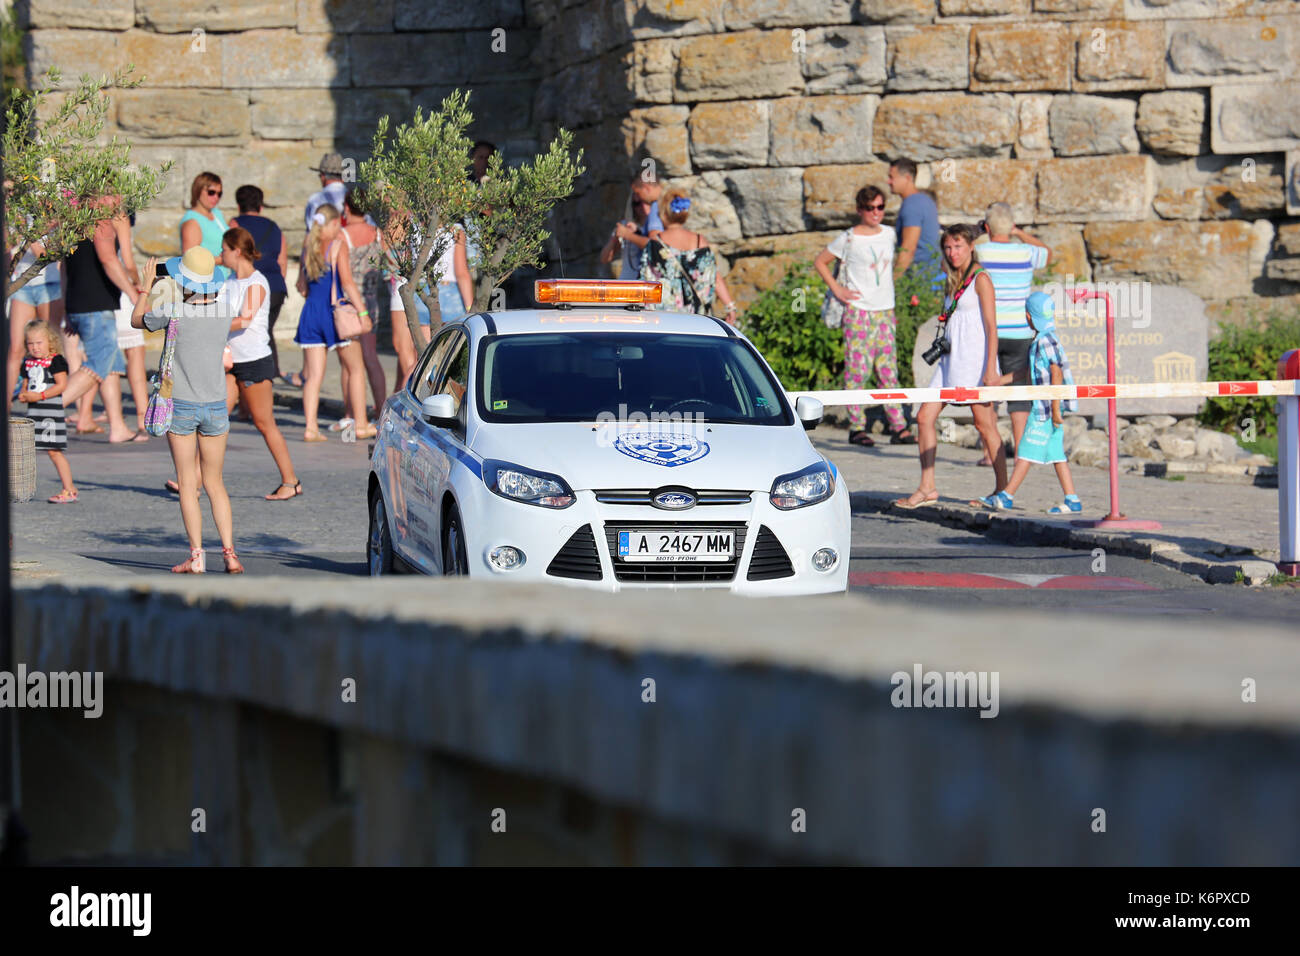 Nessebar, Bulgaria - July 16, 2016: White Ford Focus Police (Municipality Of Nessebar) Car Parked on the Street in Nessebar on the Bulgarian Black Sea Stock Photo